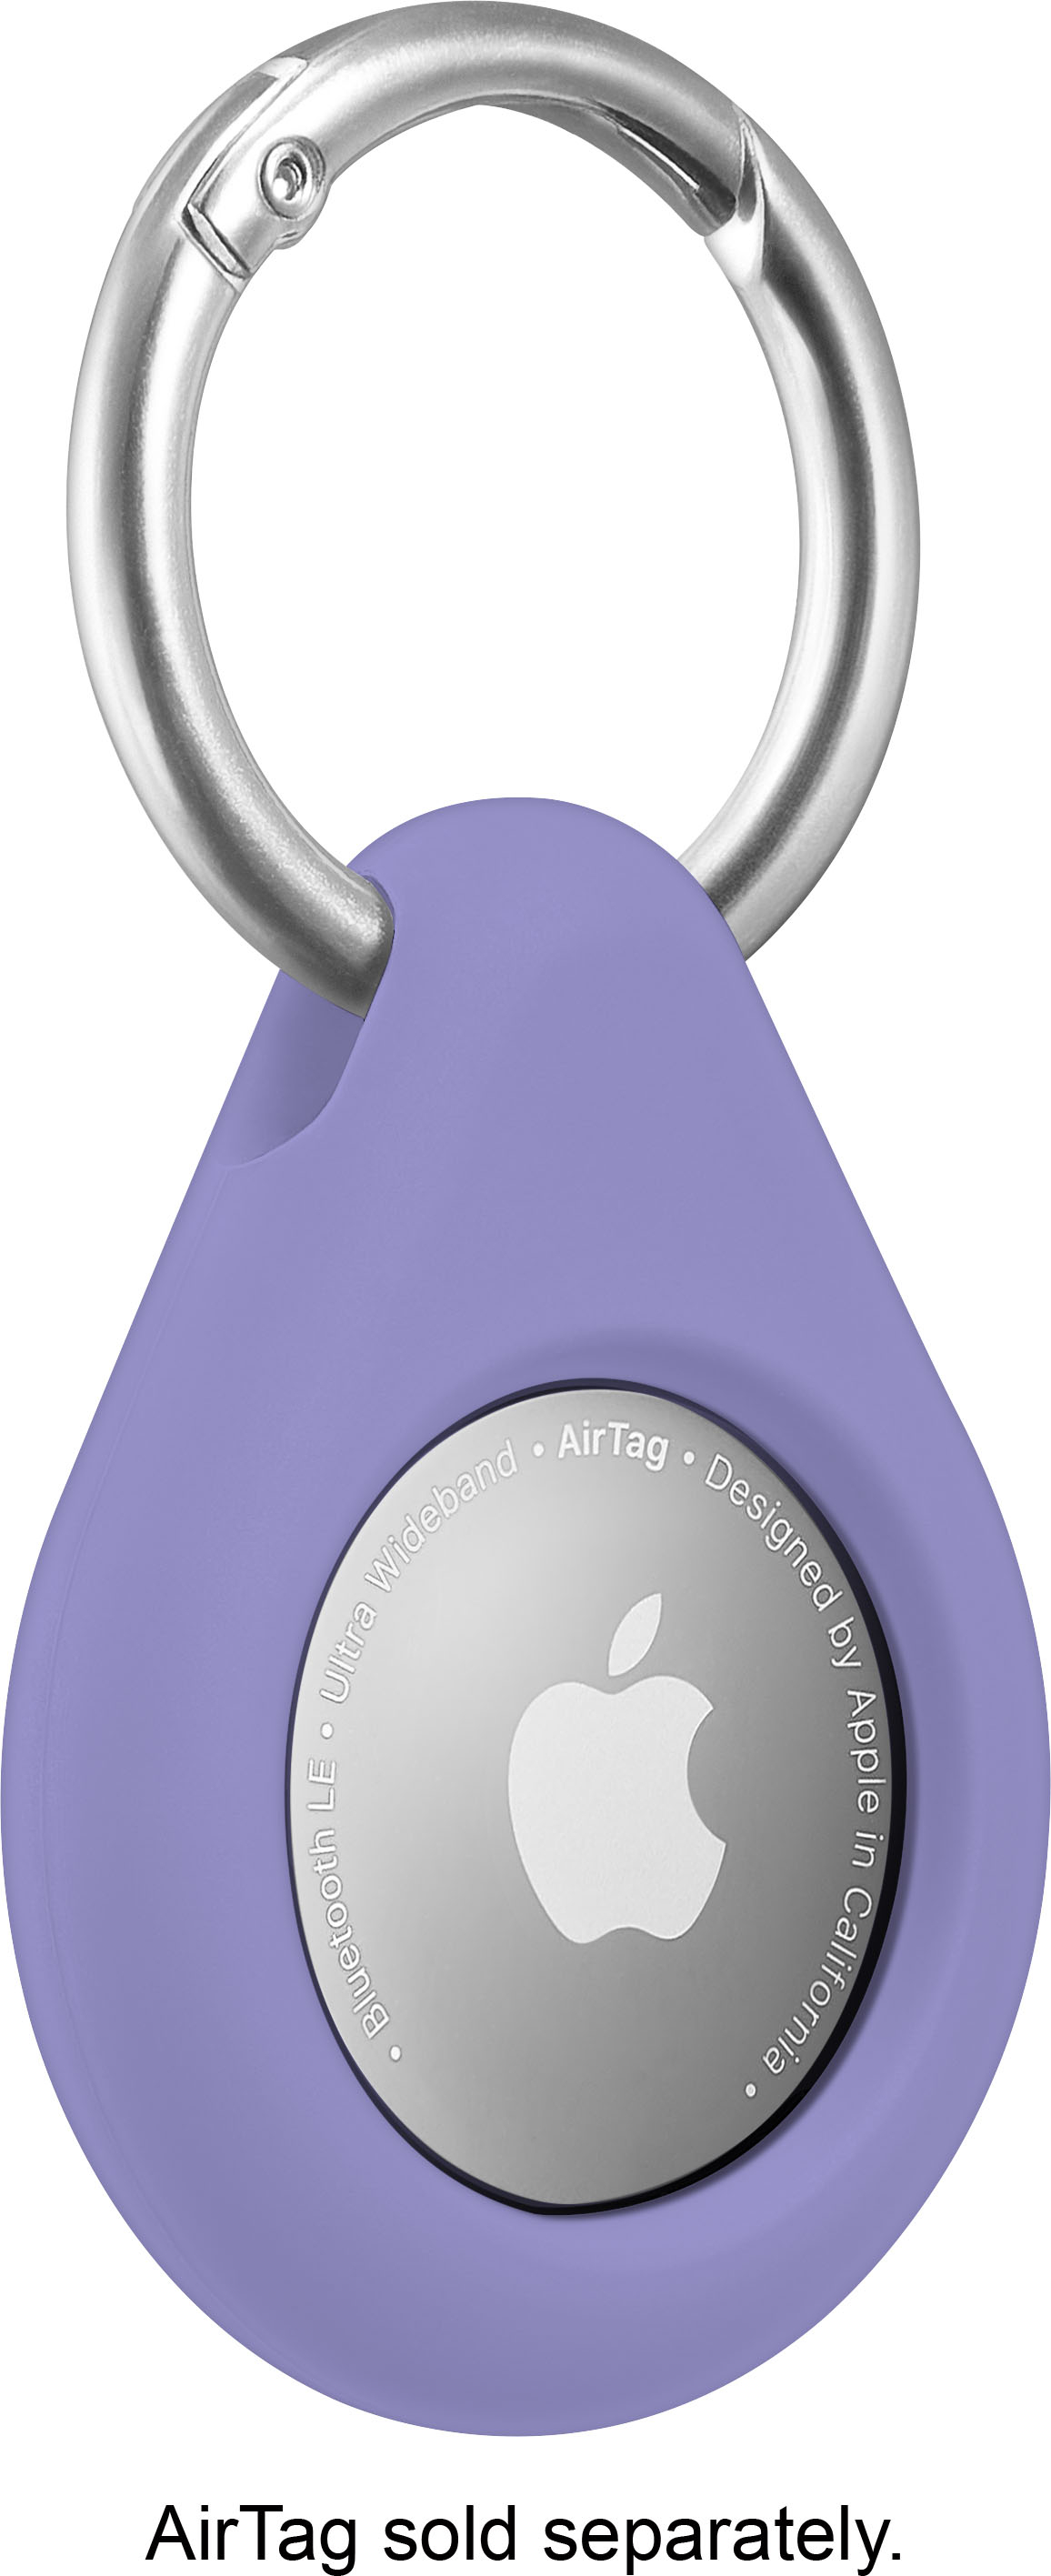 Insignia Key Ring Case for Apple AirTag